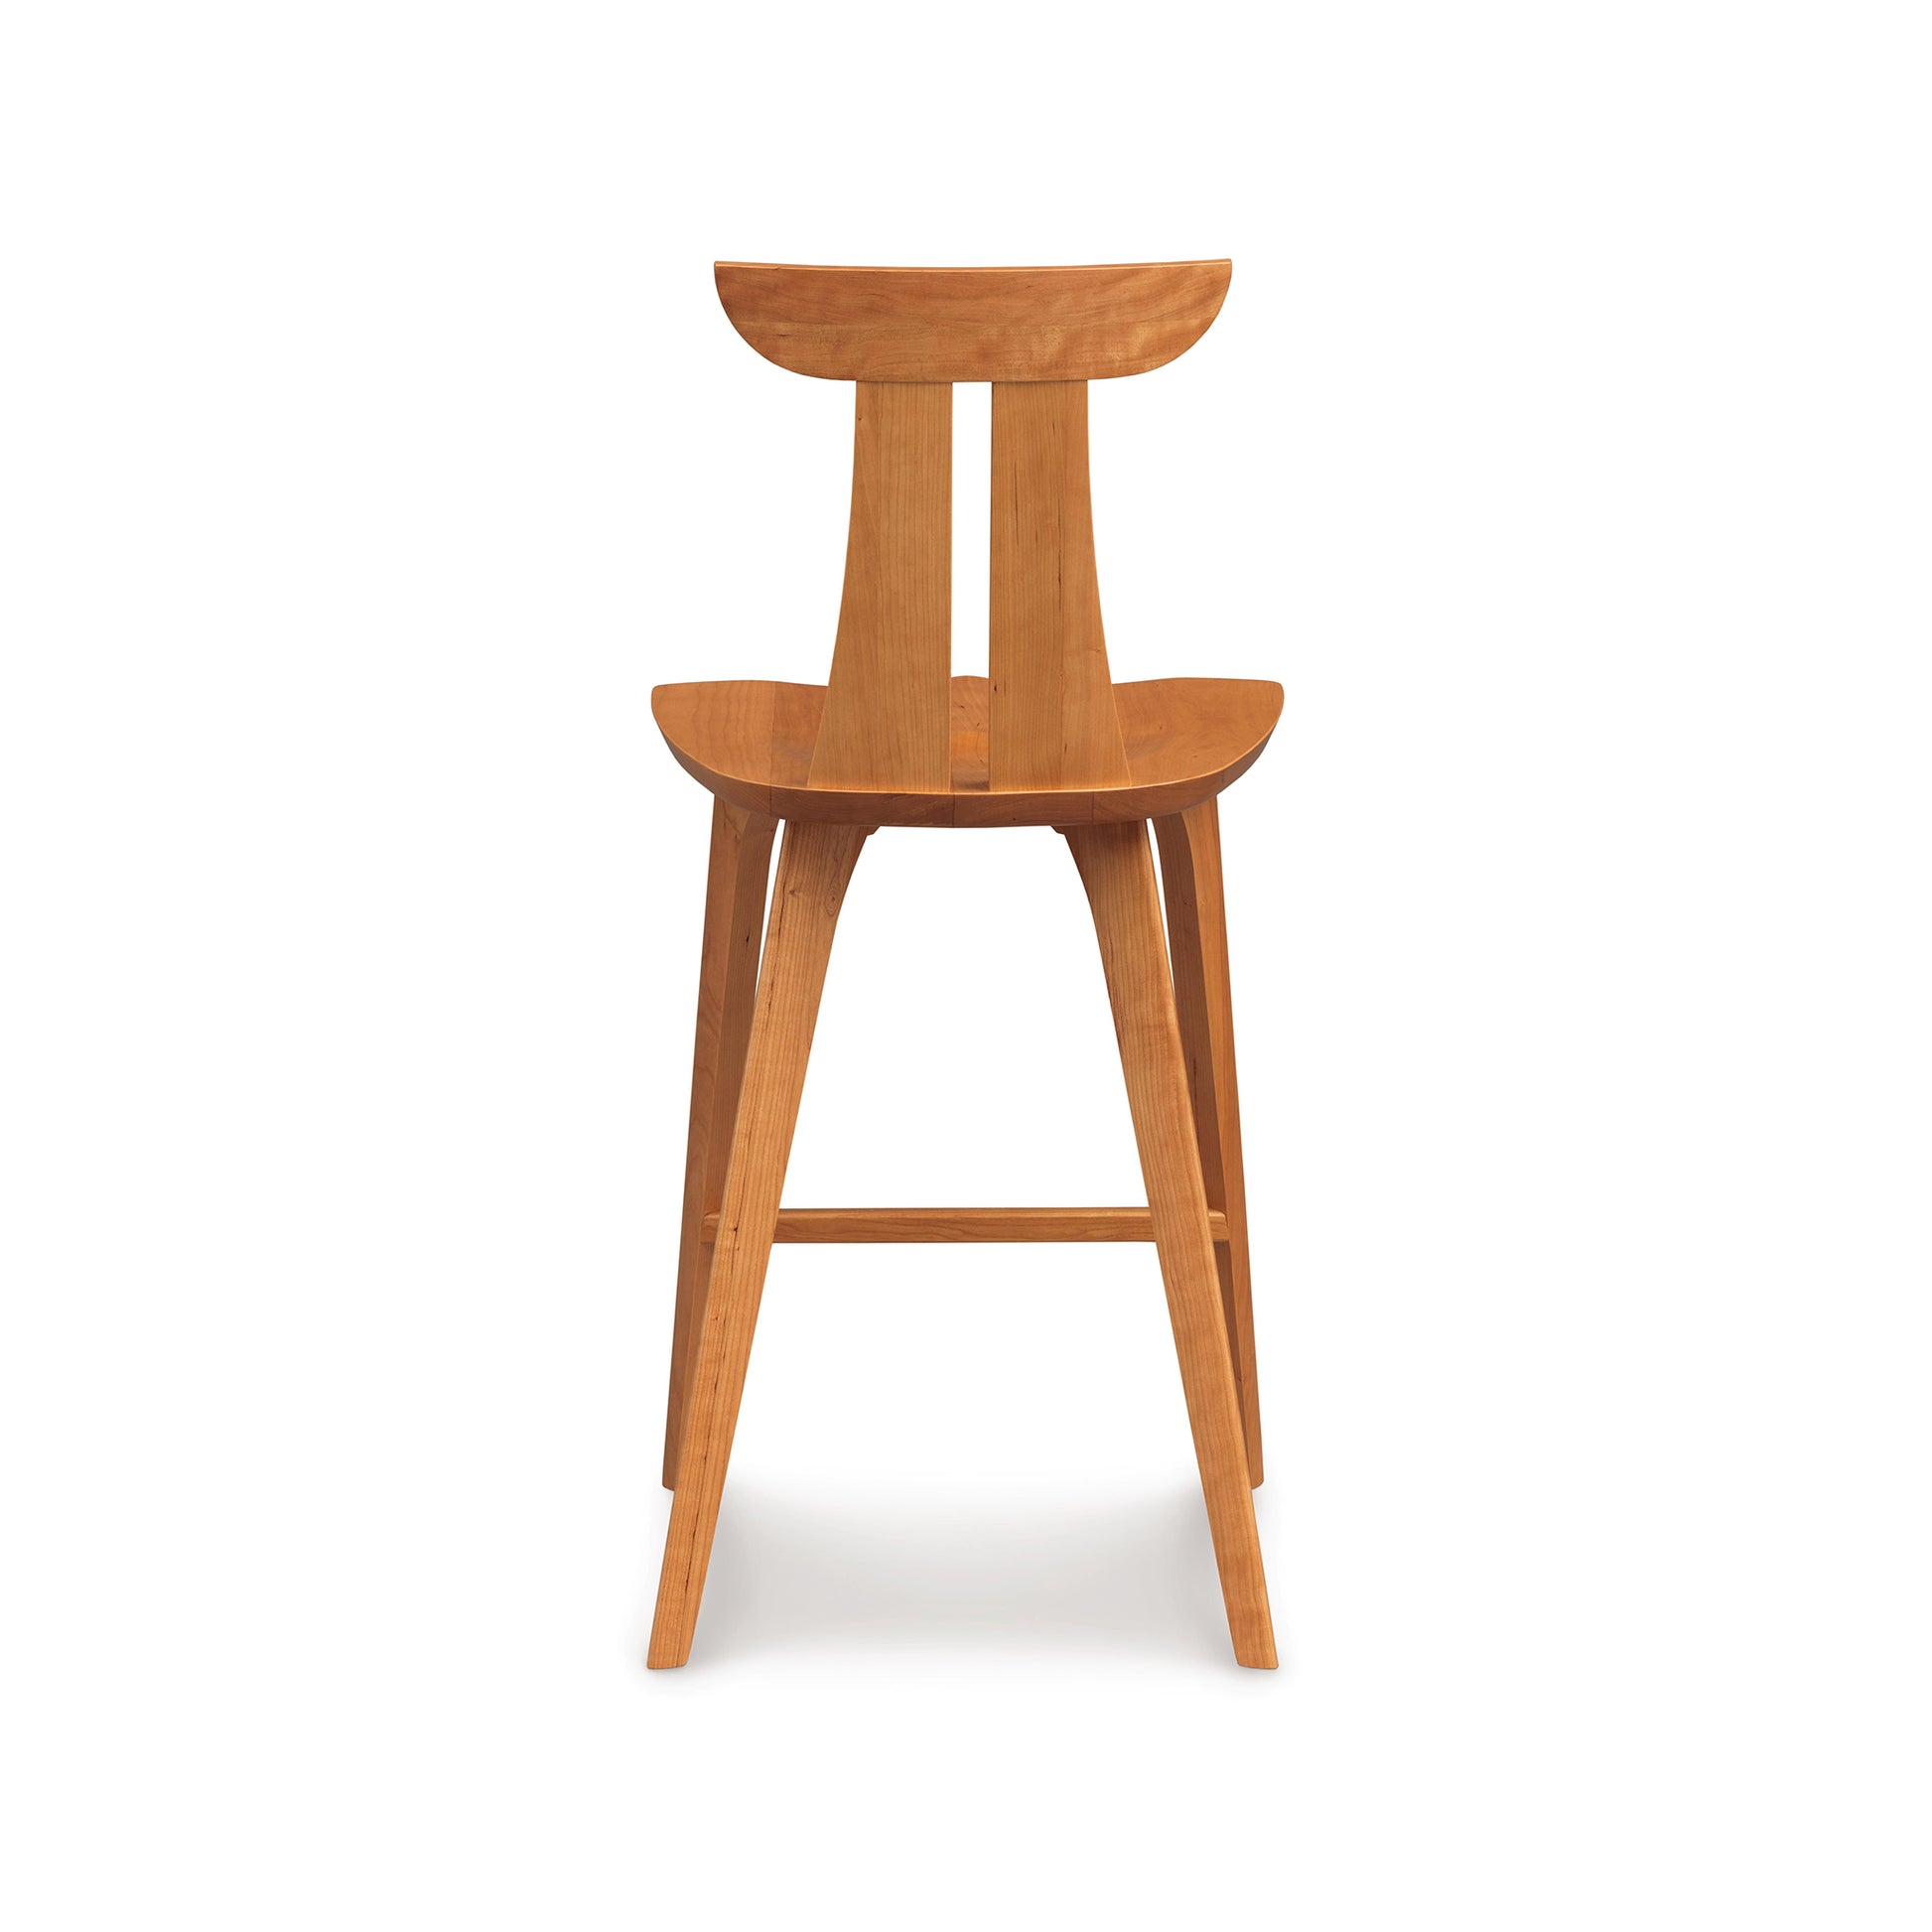 A mid-century modern Estelle Counter Stool by Copeland Furniture with a contoured seat and backrest, set against a white background.